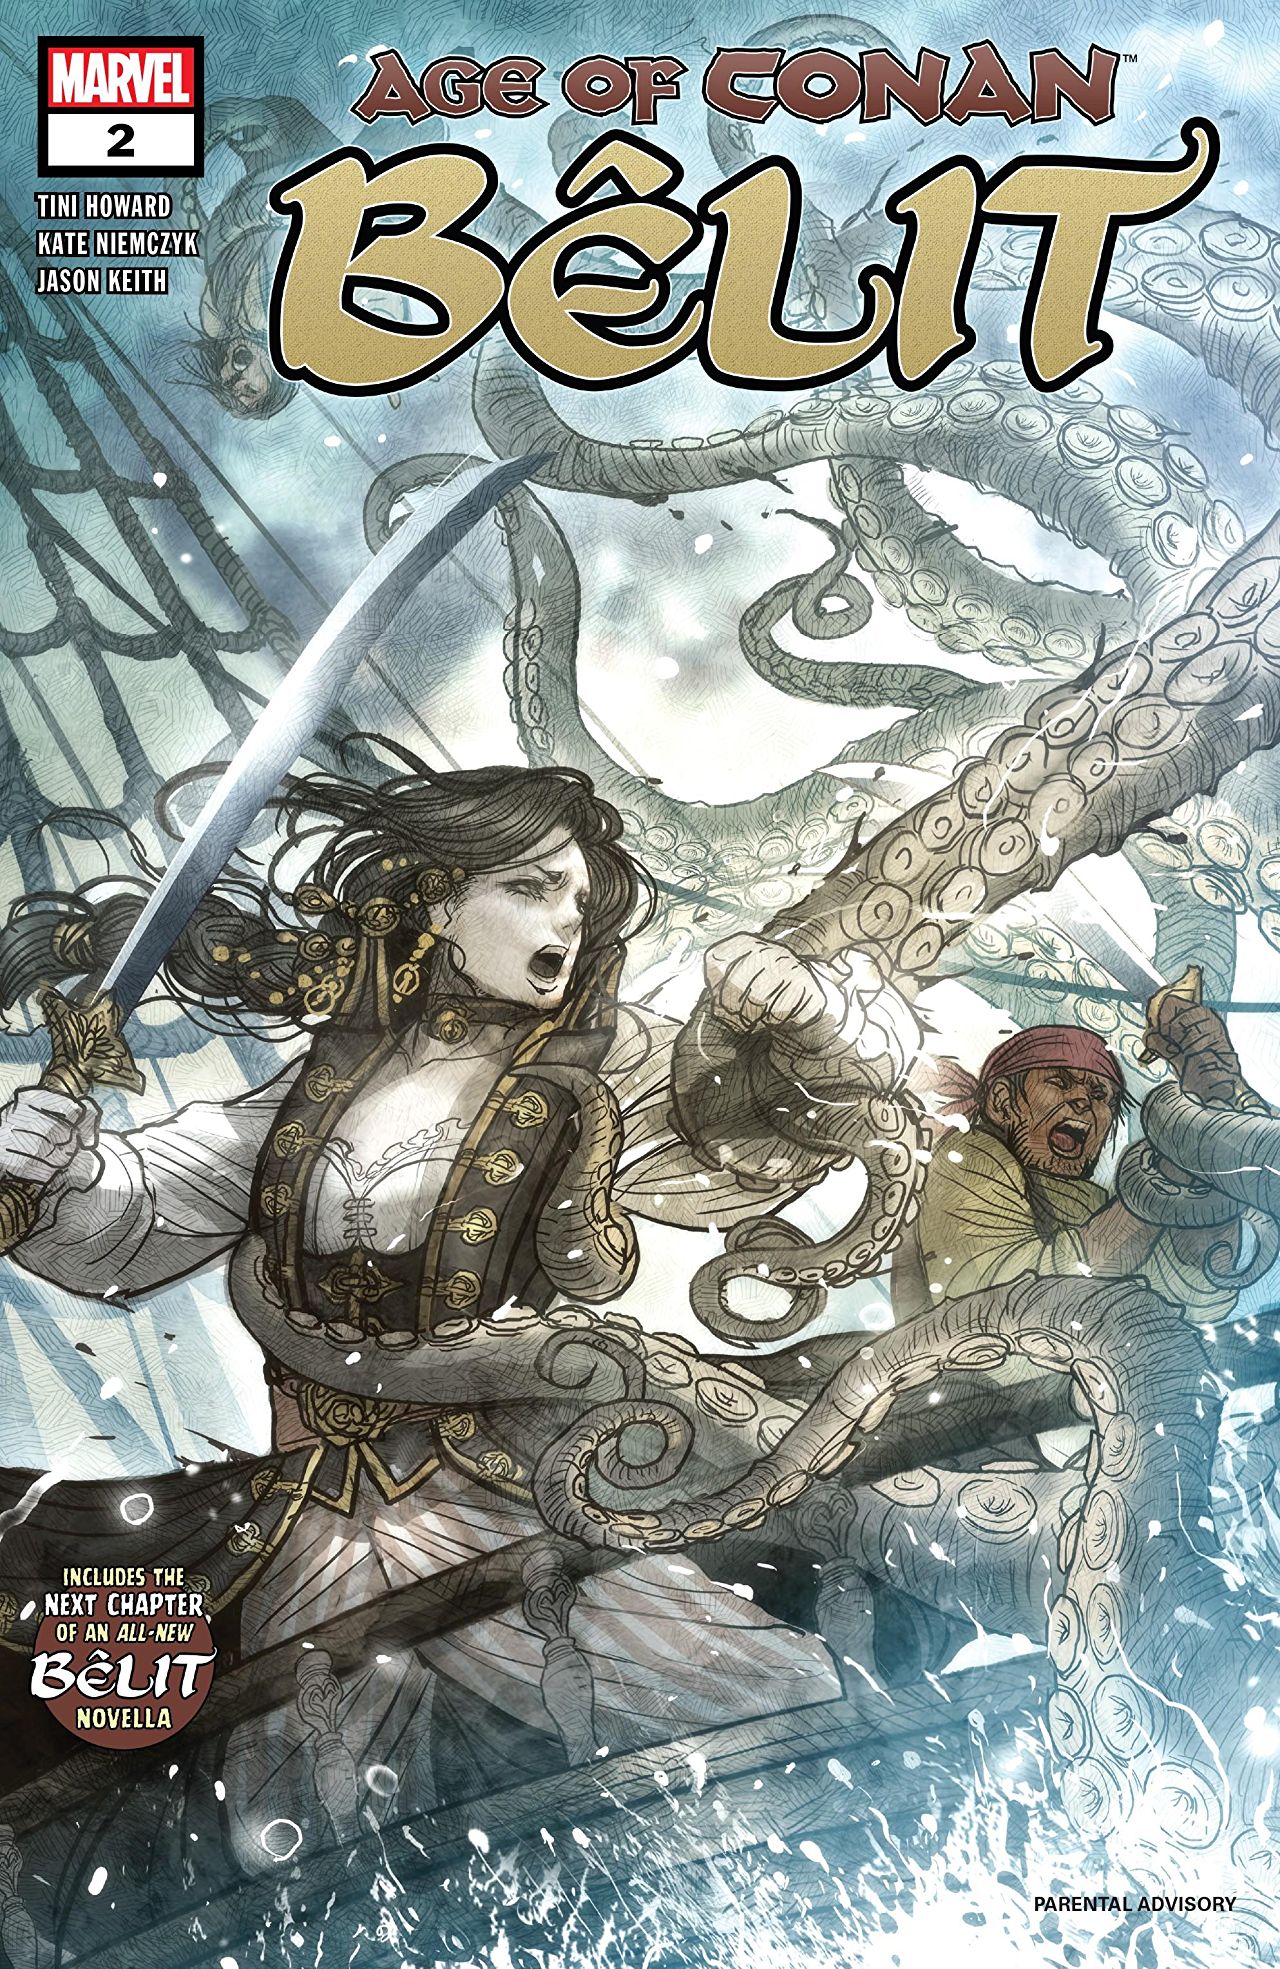 Marvel Preview: Age of Conan: Belit, Queen of the Black Coast #2